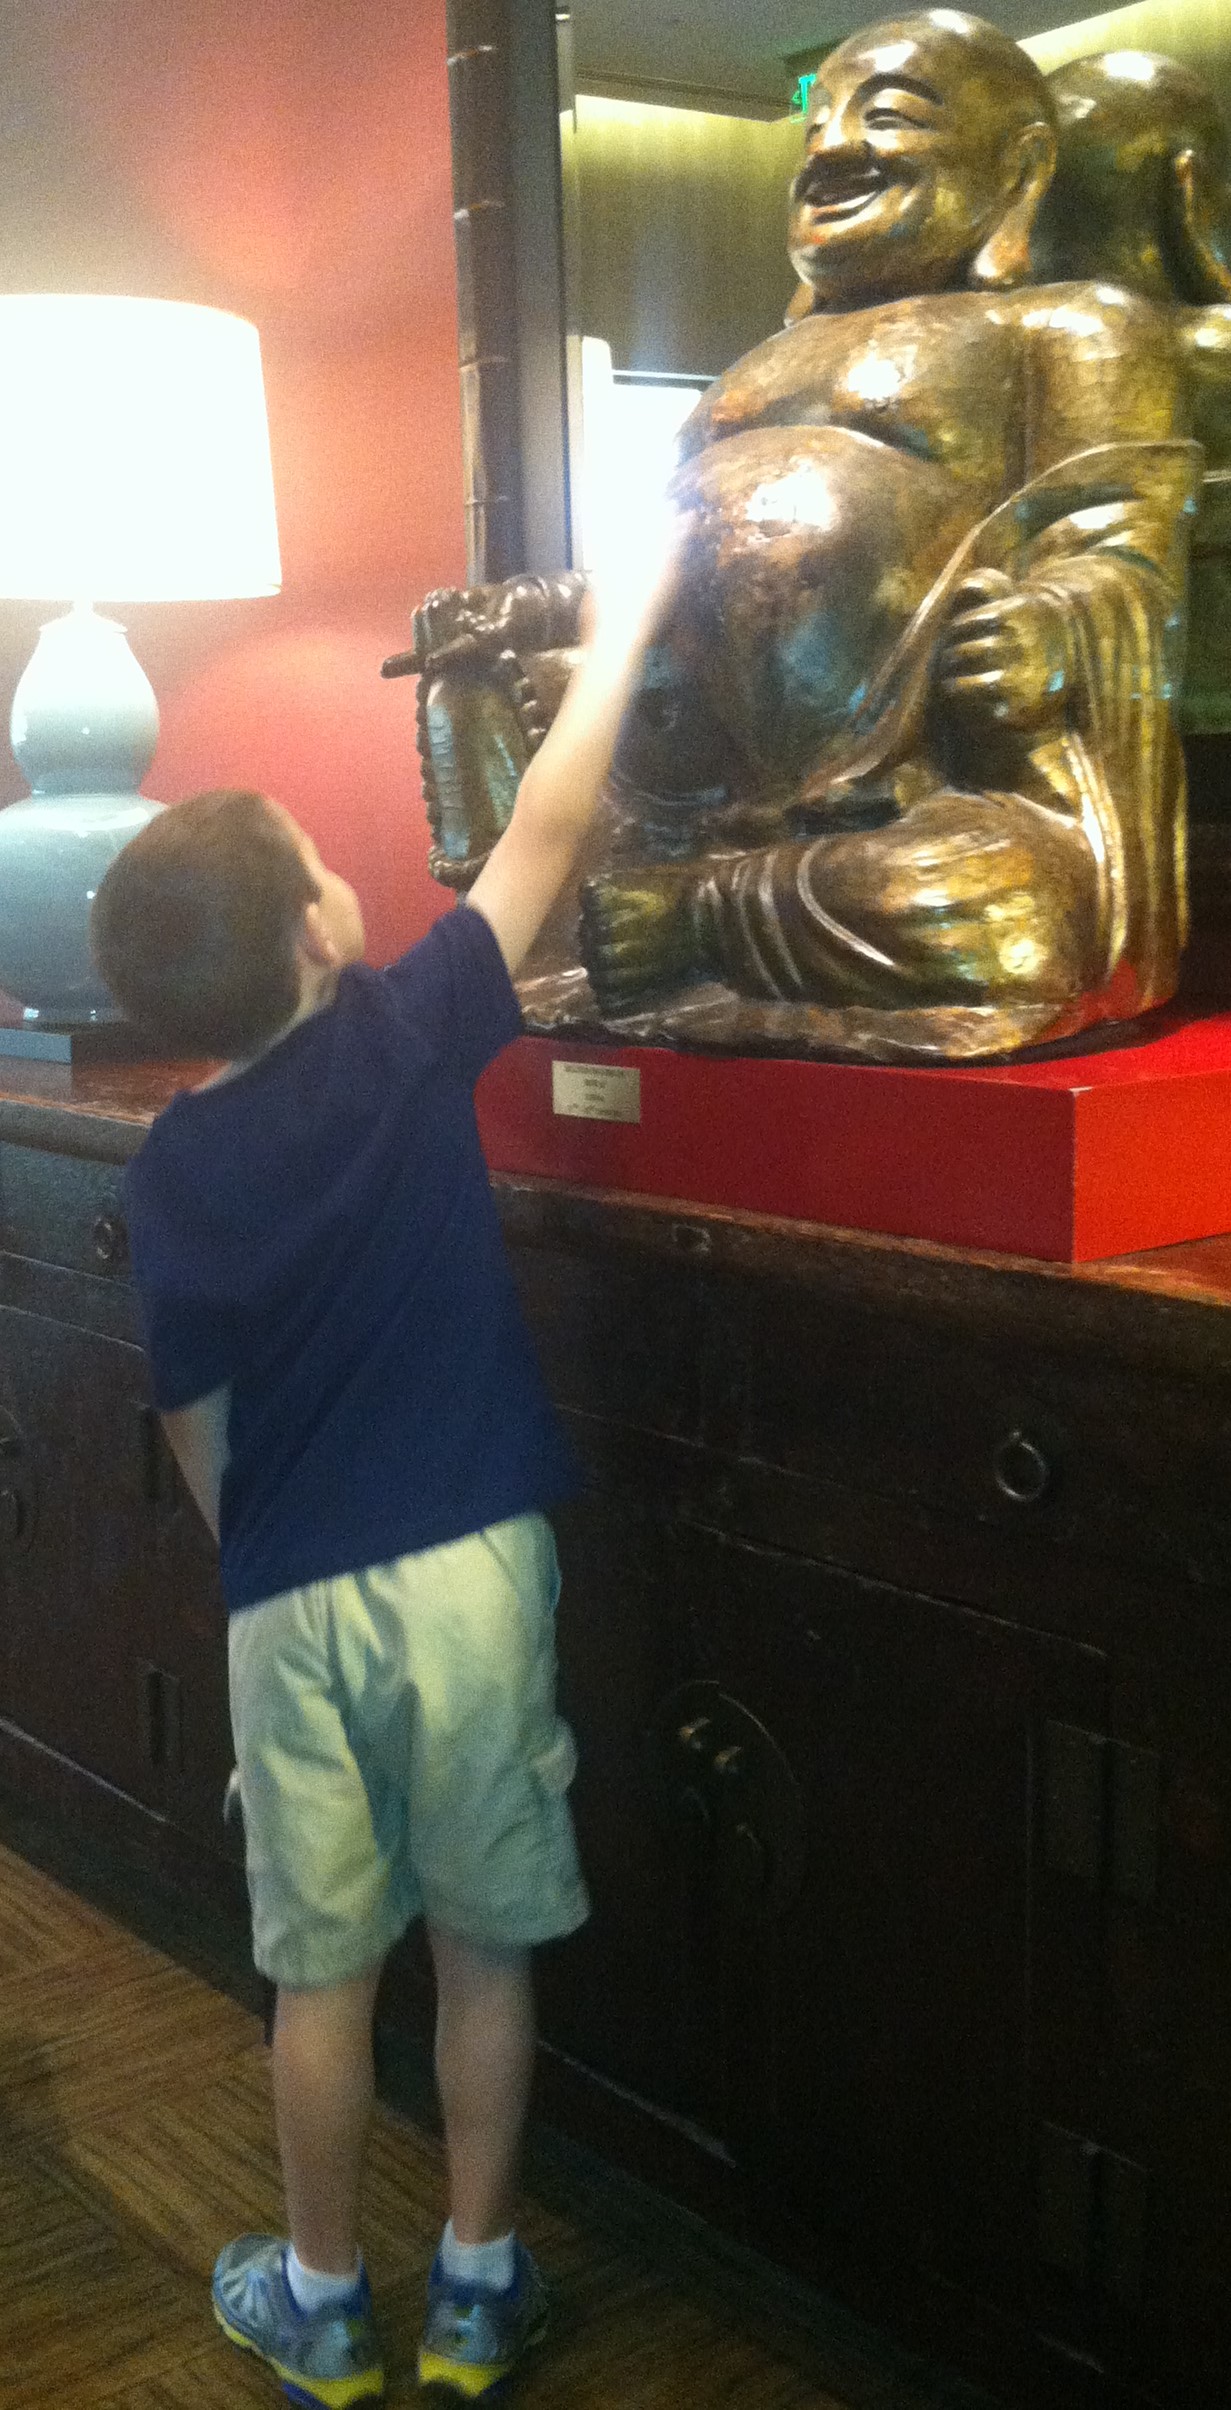 This is a bronze Buddha from the 17th century.  The audio said to make sure to rub his tummy for good luck before moving on... so we did.